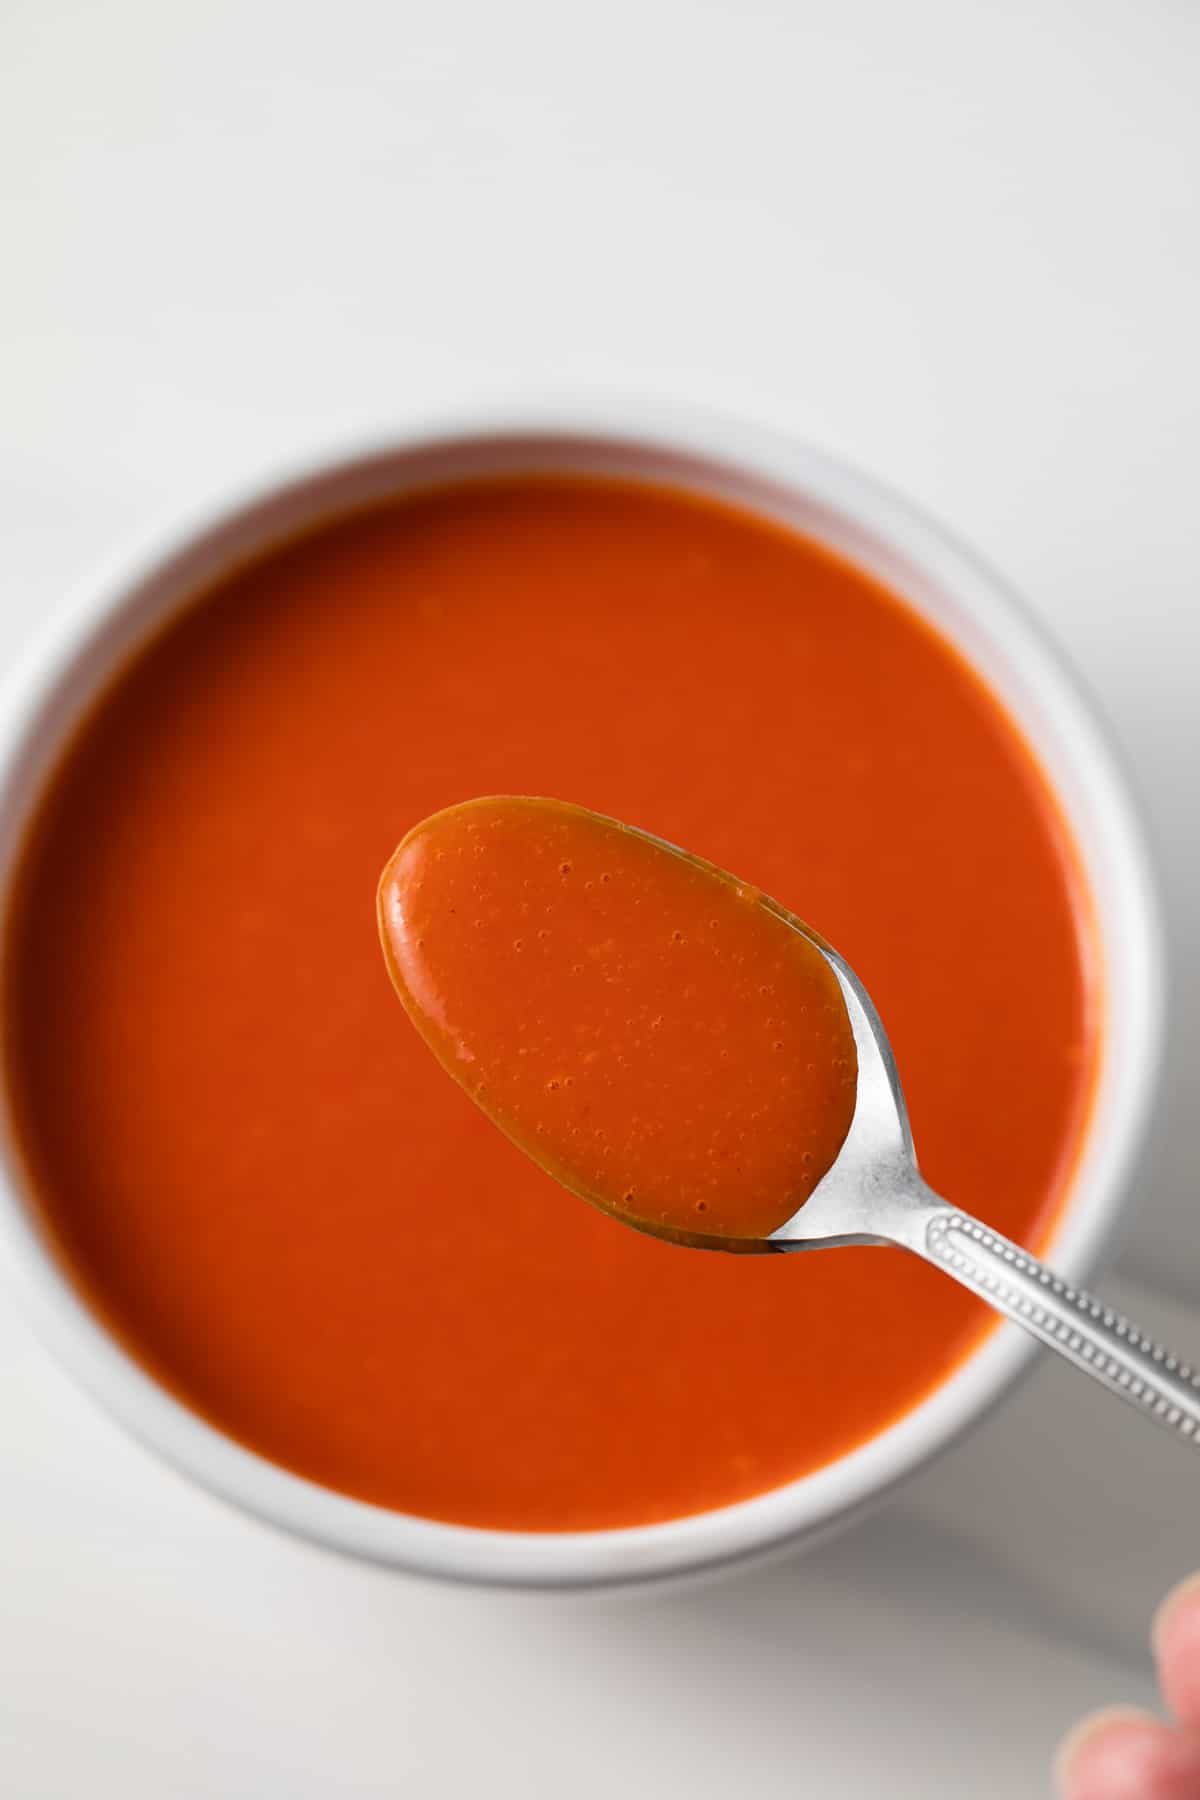 Cayenne pepper hot sauce in a white bowl with a spoon.